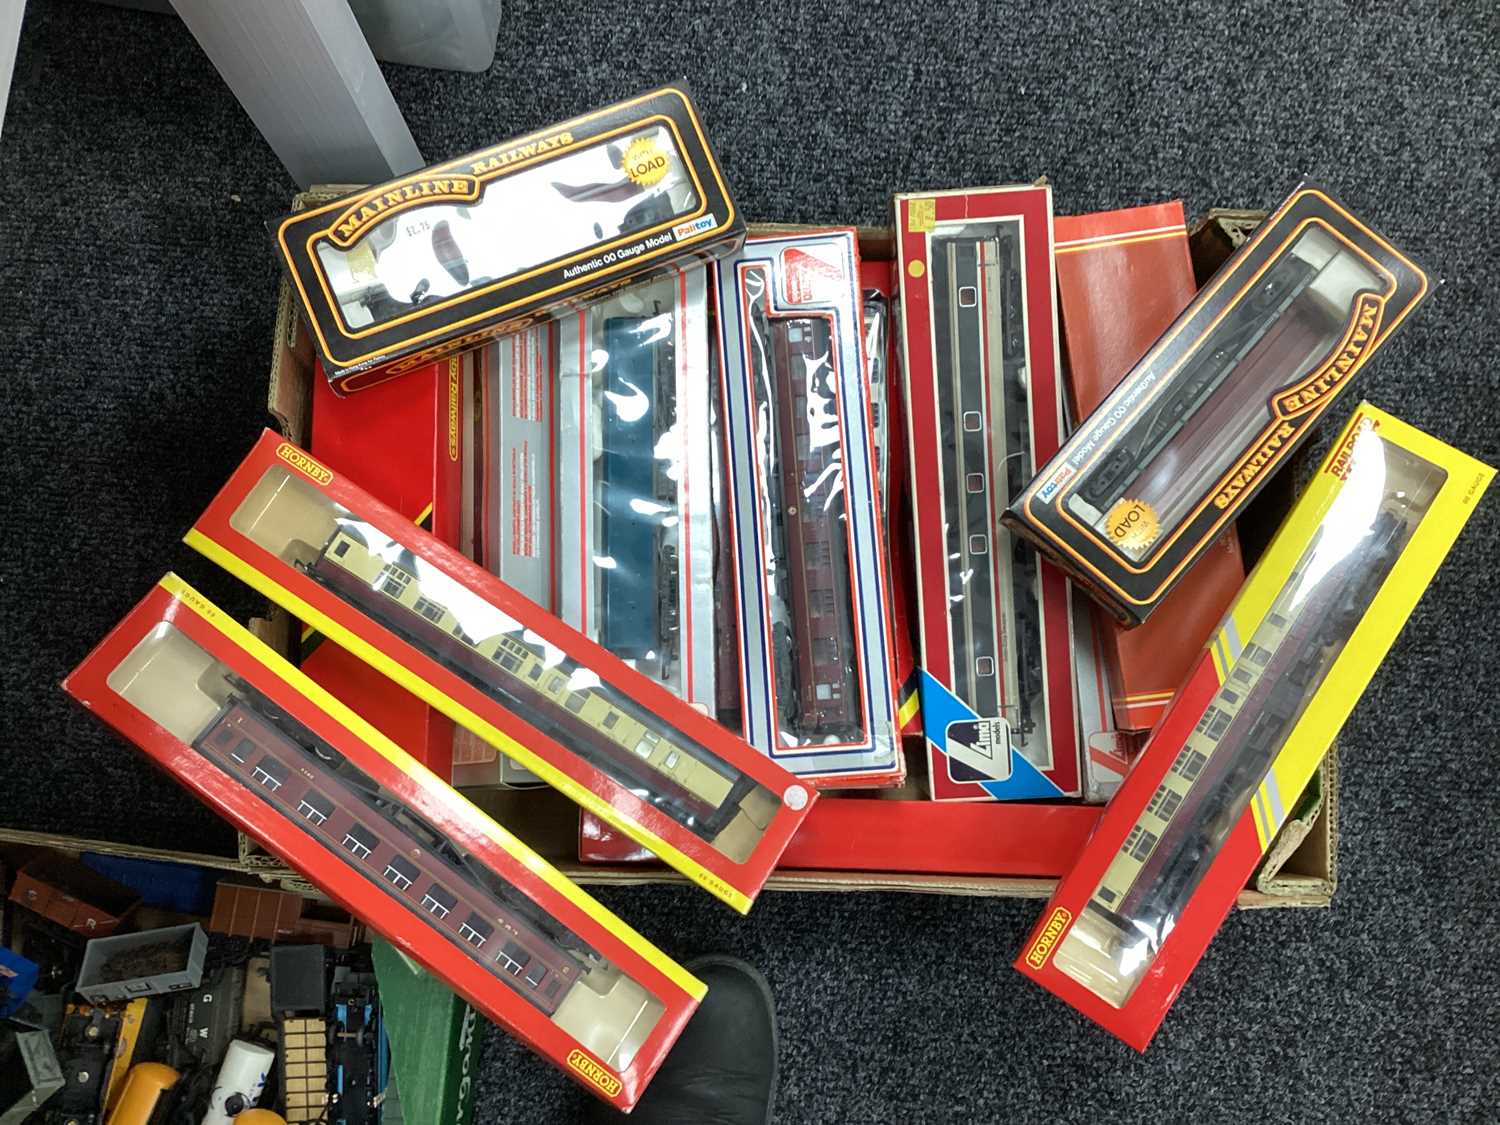 OO gauge coaches from Mainline, Hornby, Lima etc. boxed, approx. 20